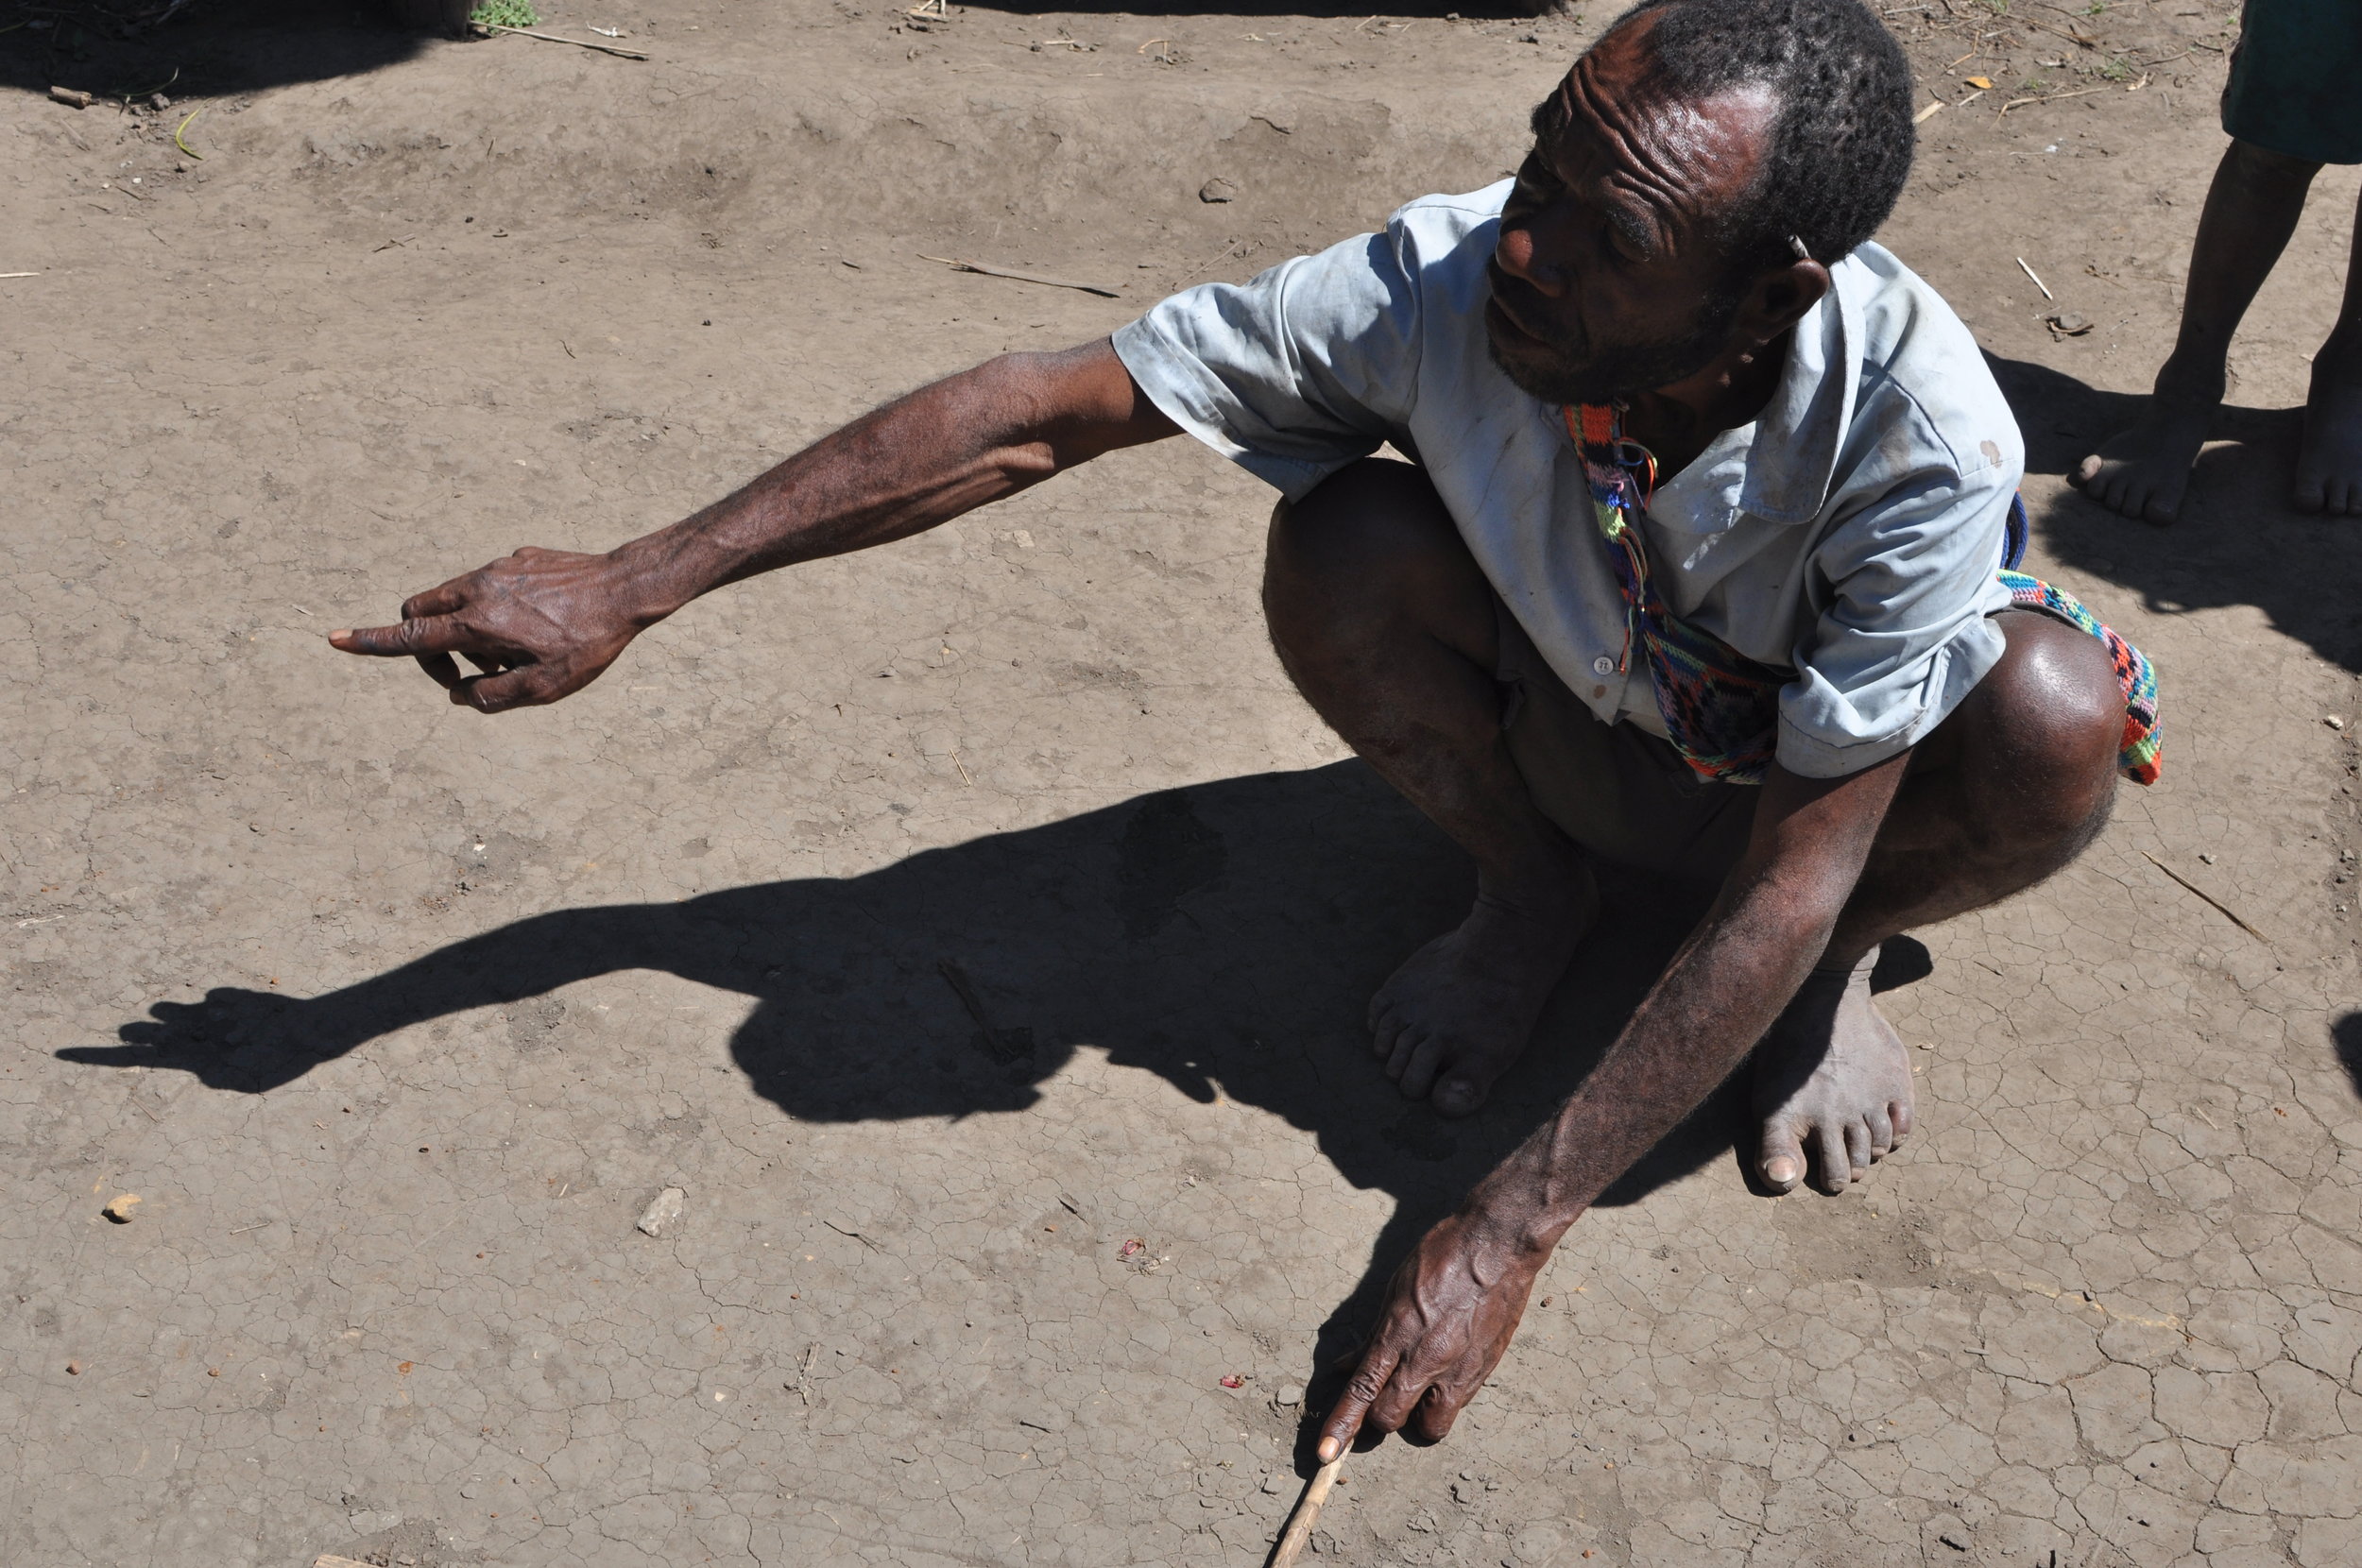  A man explains a timeline of Yupno history, recently scratched into the dirt. Gua, 2009. 